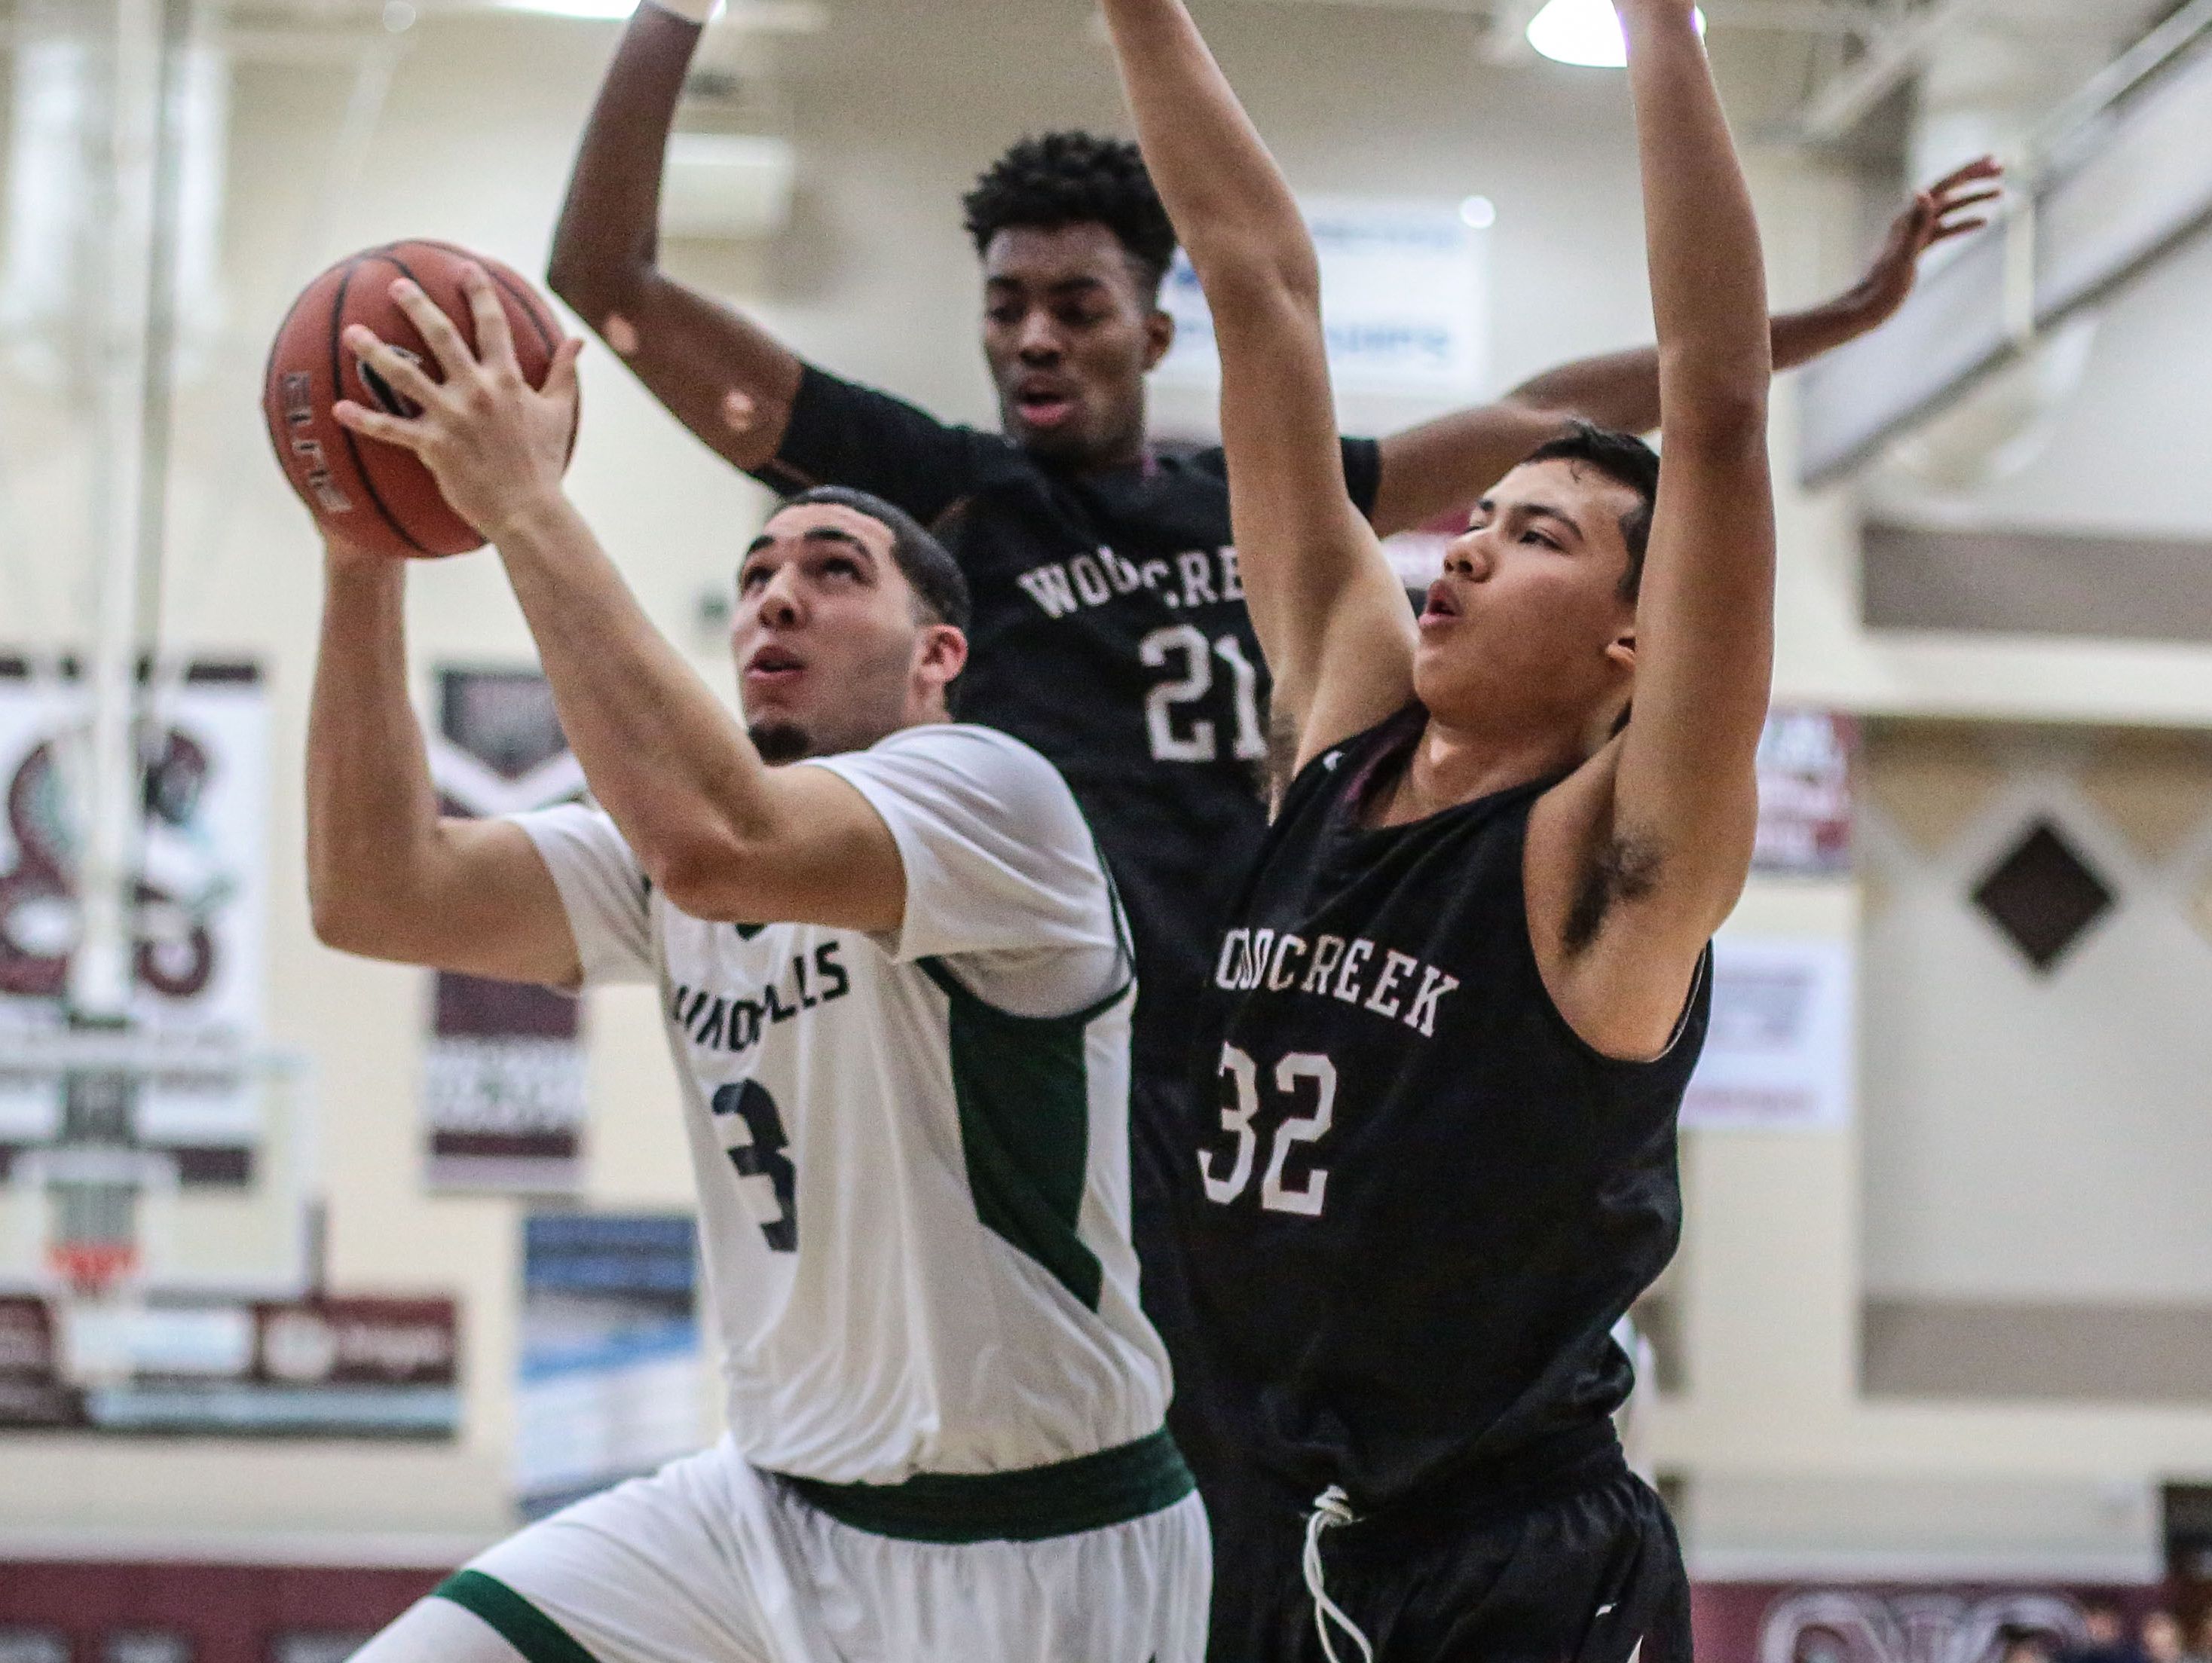 Chino Hills LiAngelo Ball goes for the basket as Woodcreek's Jordan Brown and Chris Cagle try to block him on Wednesday, December 28, 2016 during the Rancho Mirage Holiday Invitational at Rancho Mirage High School.